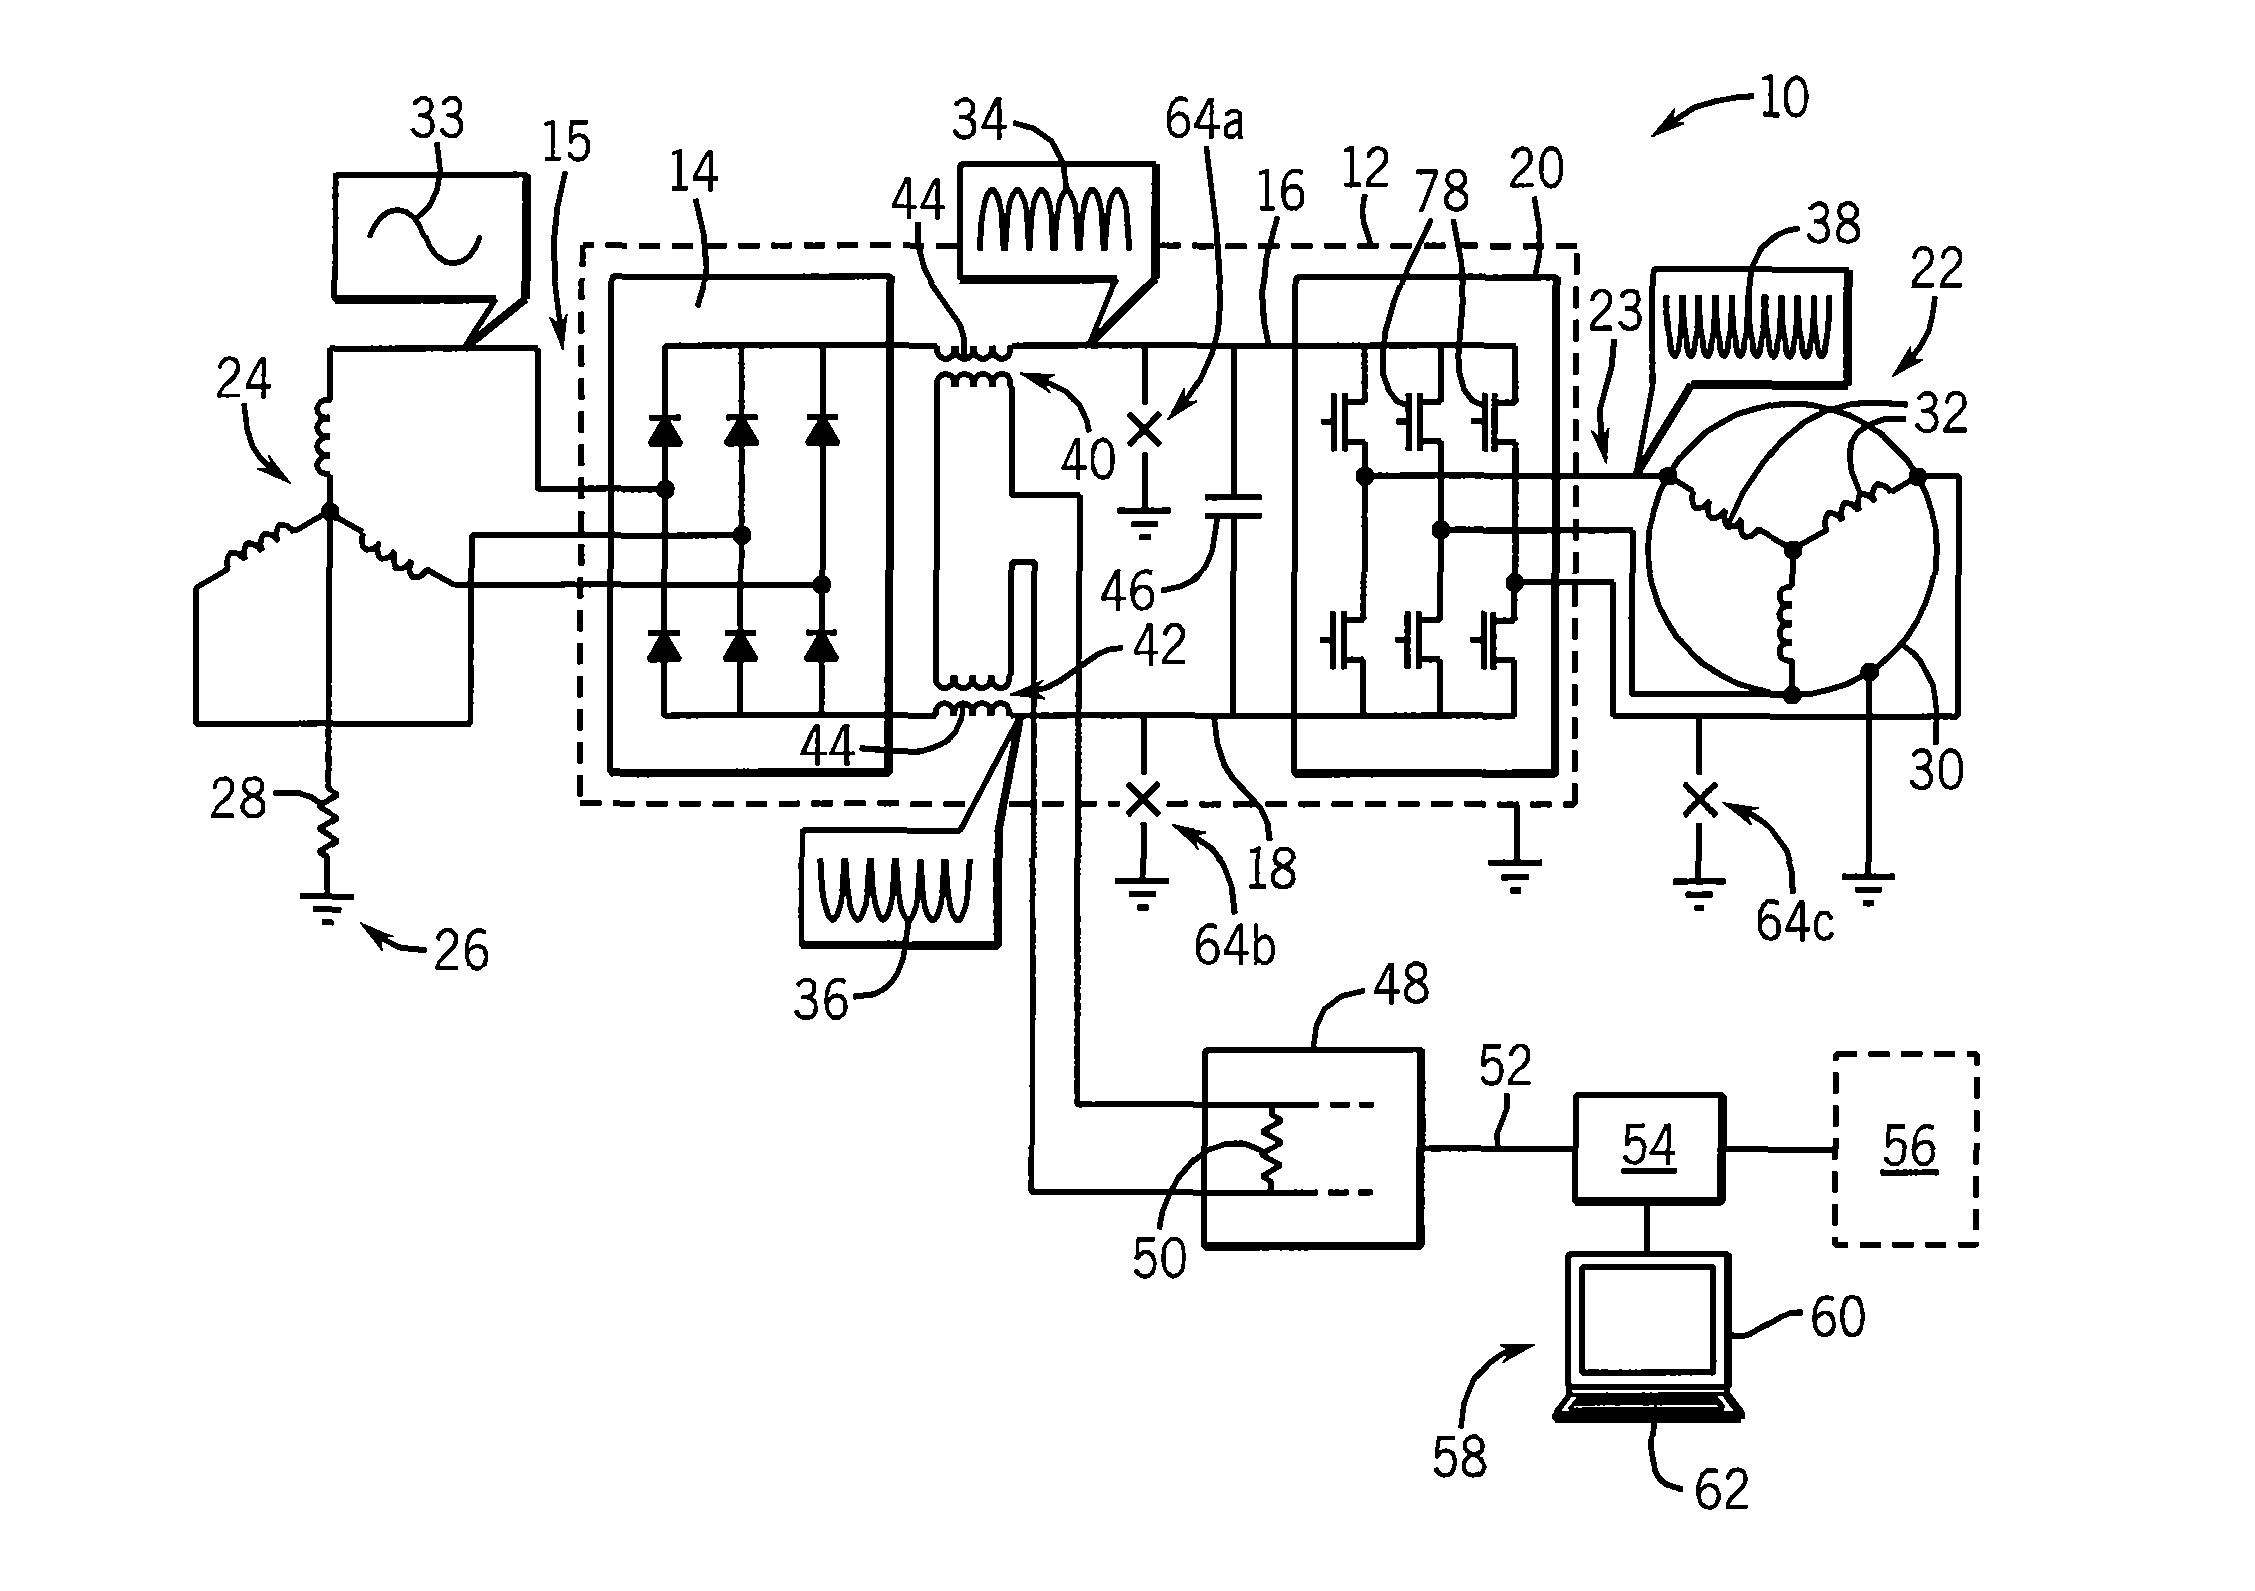 Method and apparatus for detecting a location of ground faults in a motor/motor drive combination